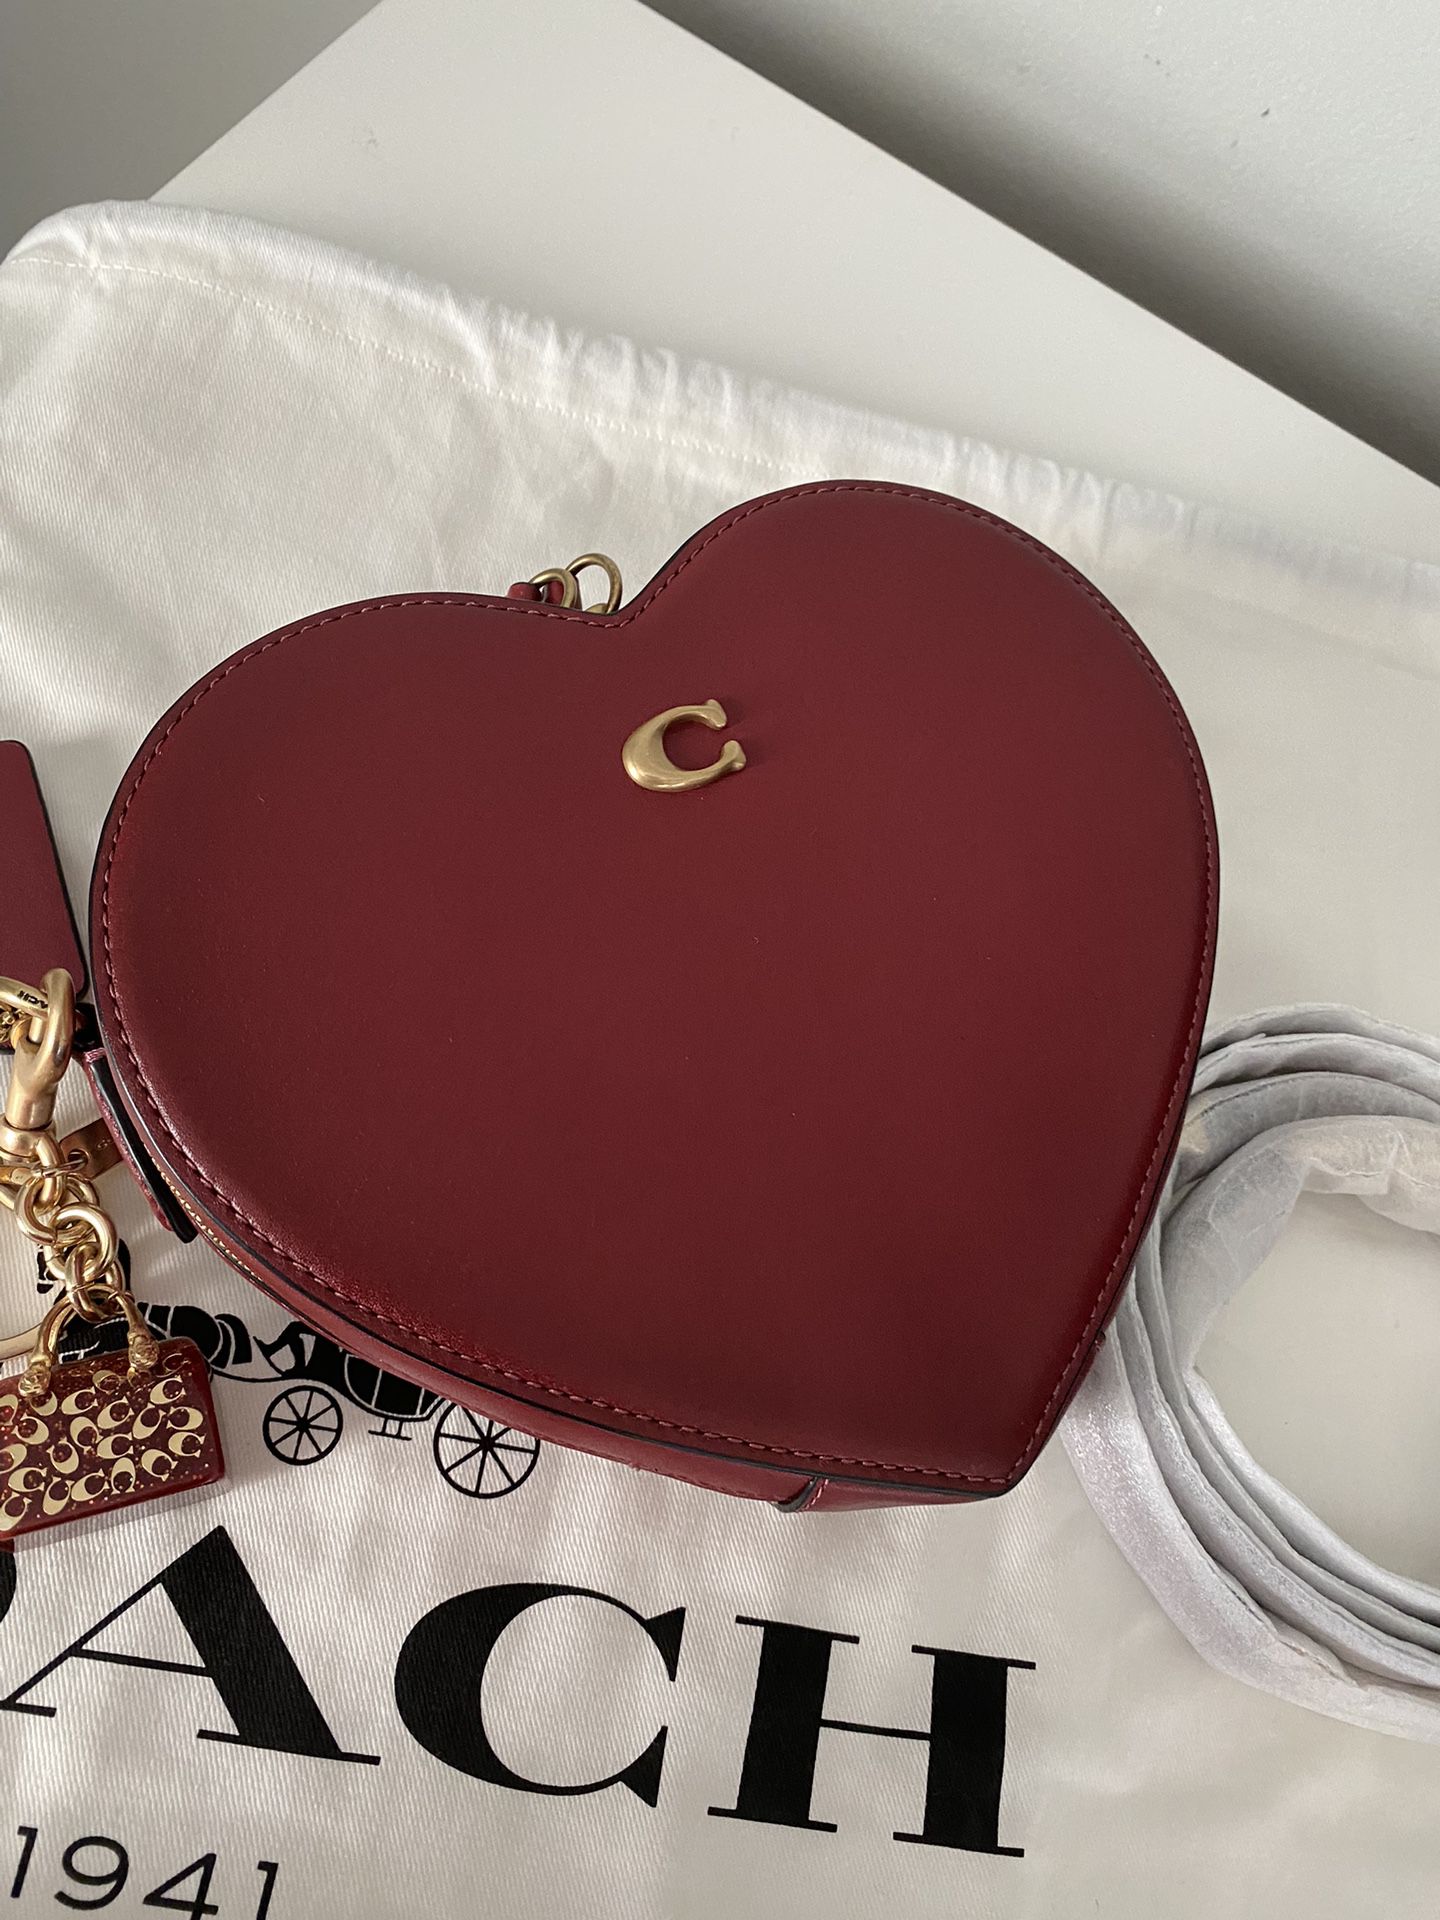 Coach Heart Crossbody Bag for Sale in Tolleson, AZ - OfferUp